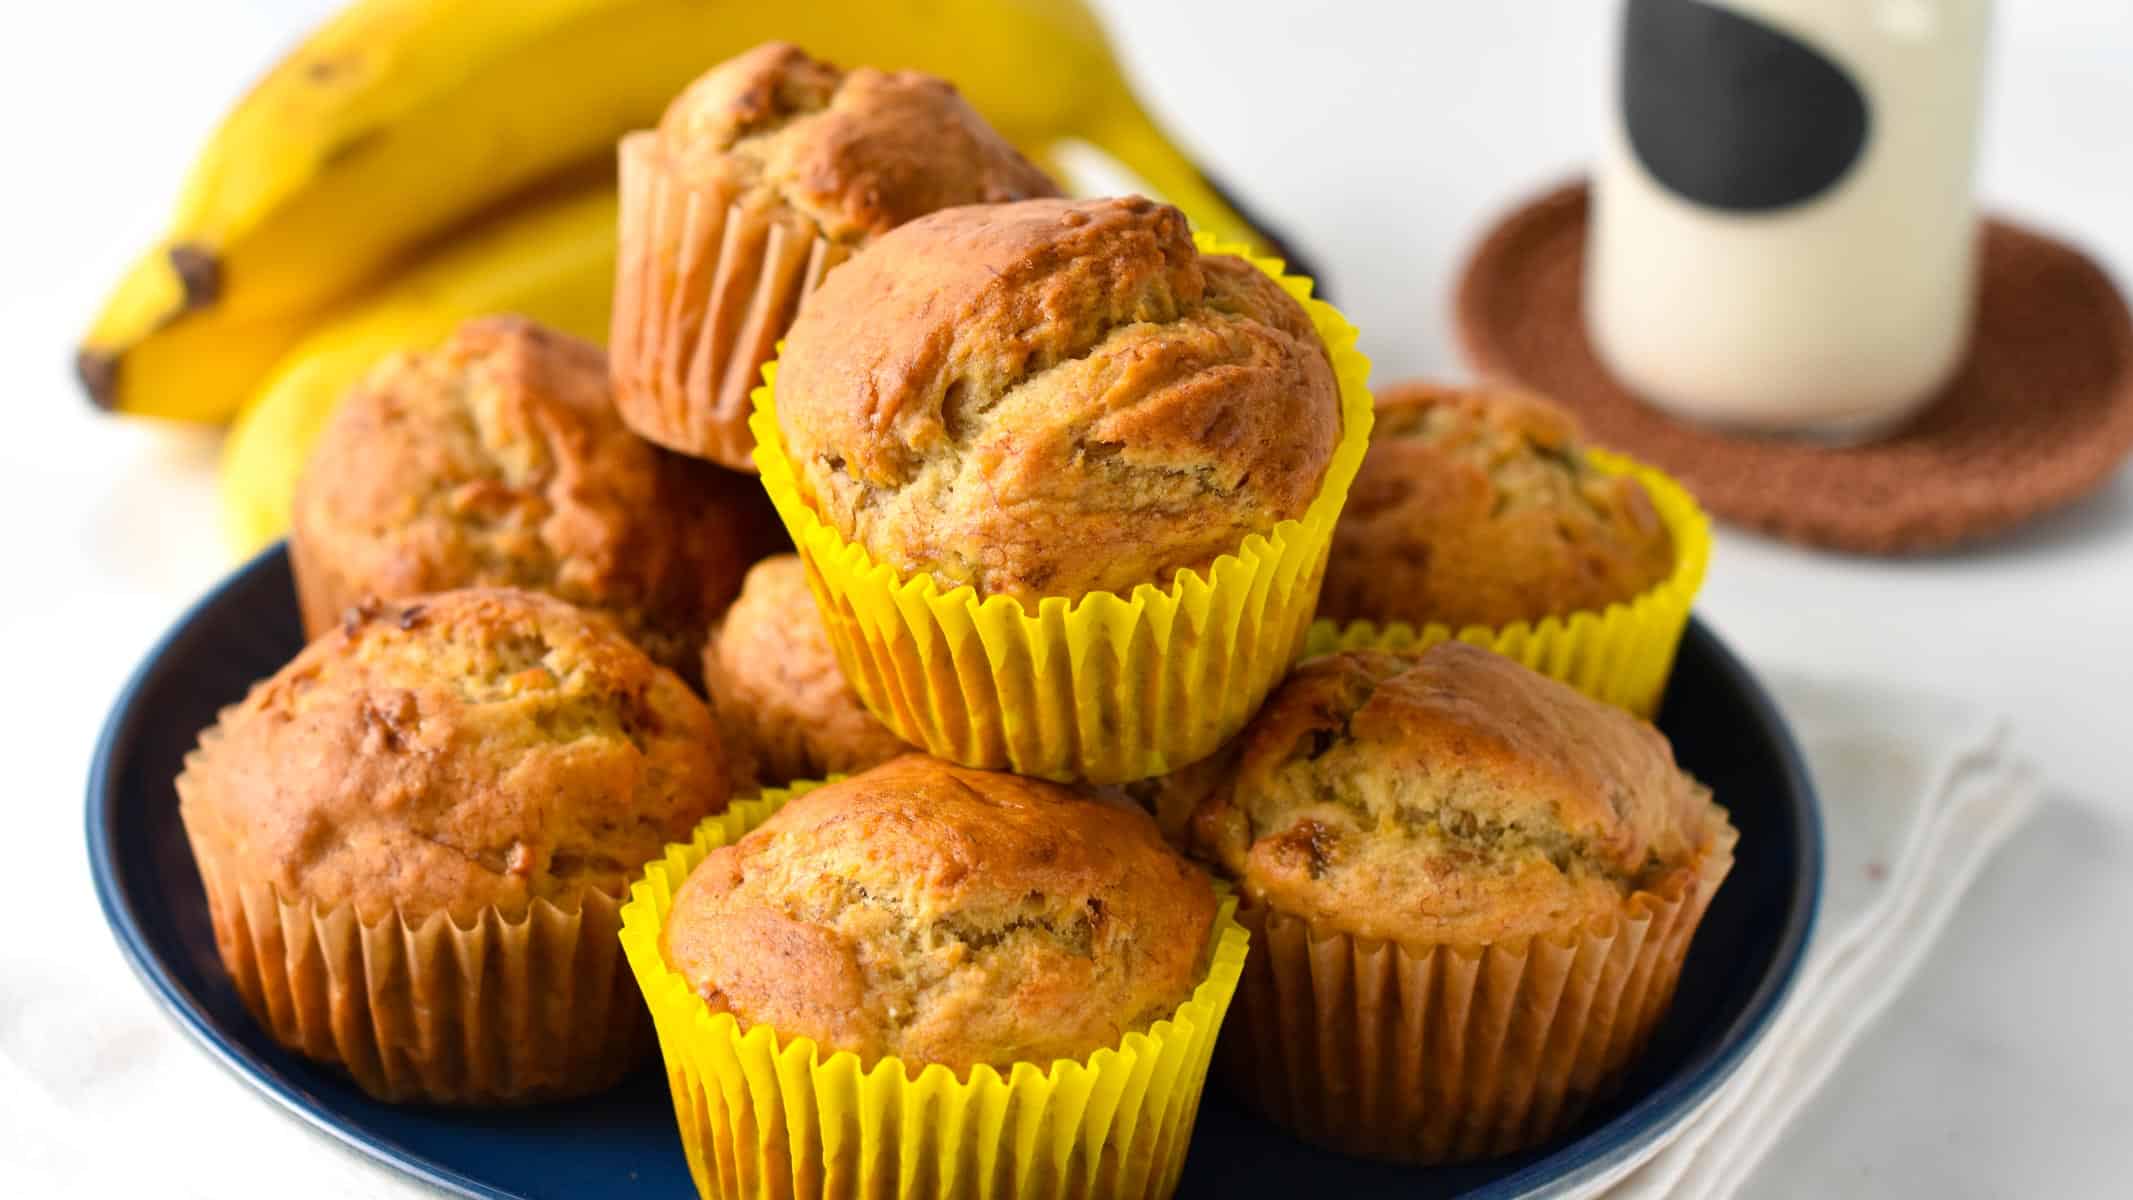 These Eggless Banana Muffins are the most fluffy, soft banana muffins made with no eggs and refined sugar free. It's a great banana muffin recipe for anyone allergic to eggs, or on a vegan diet.